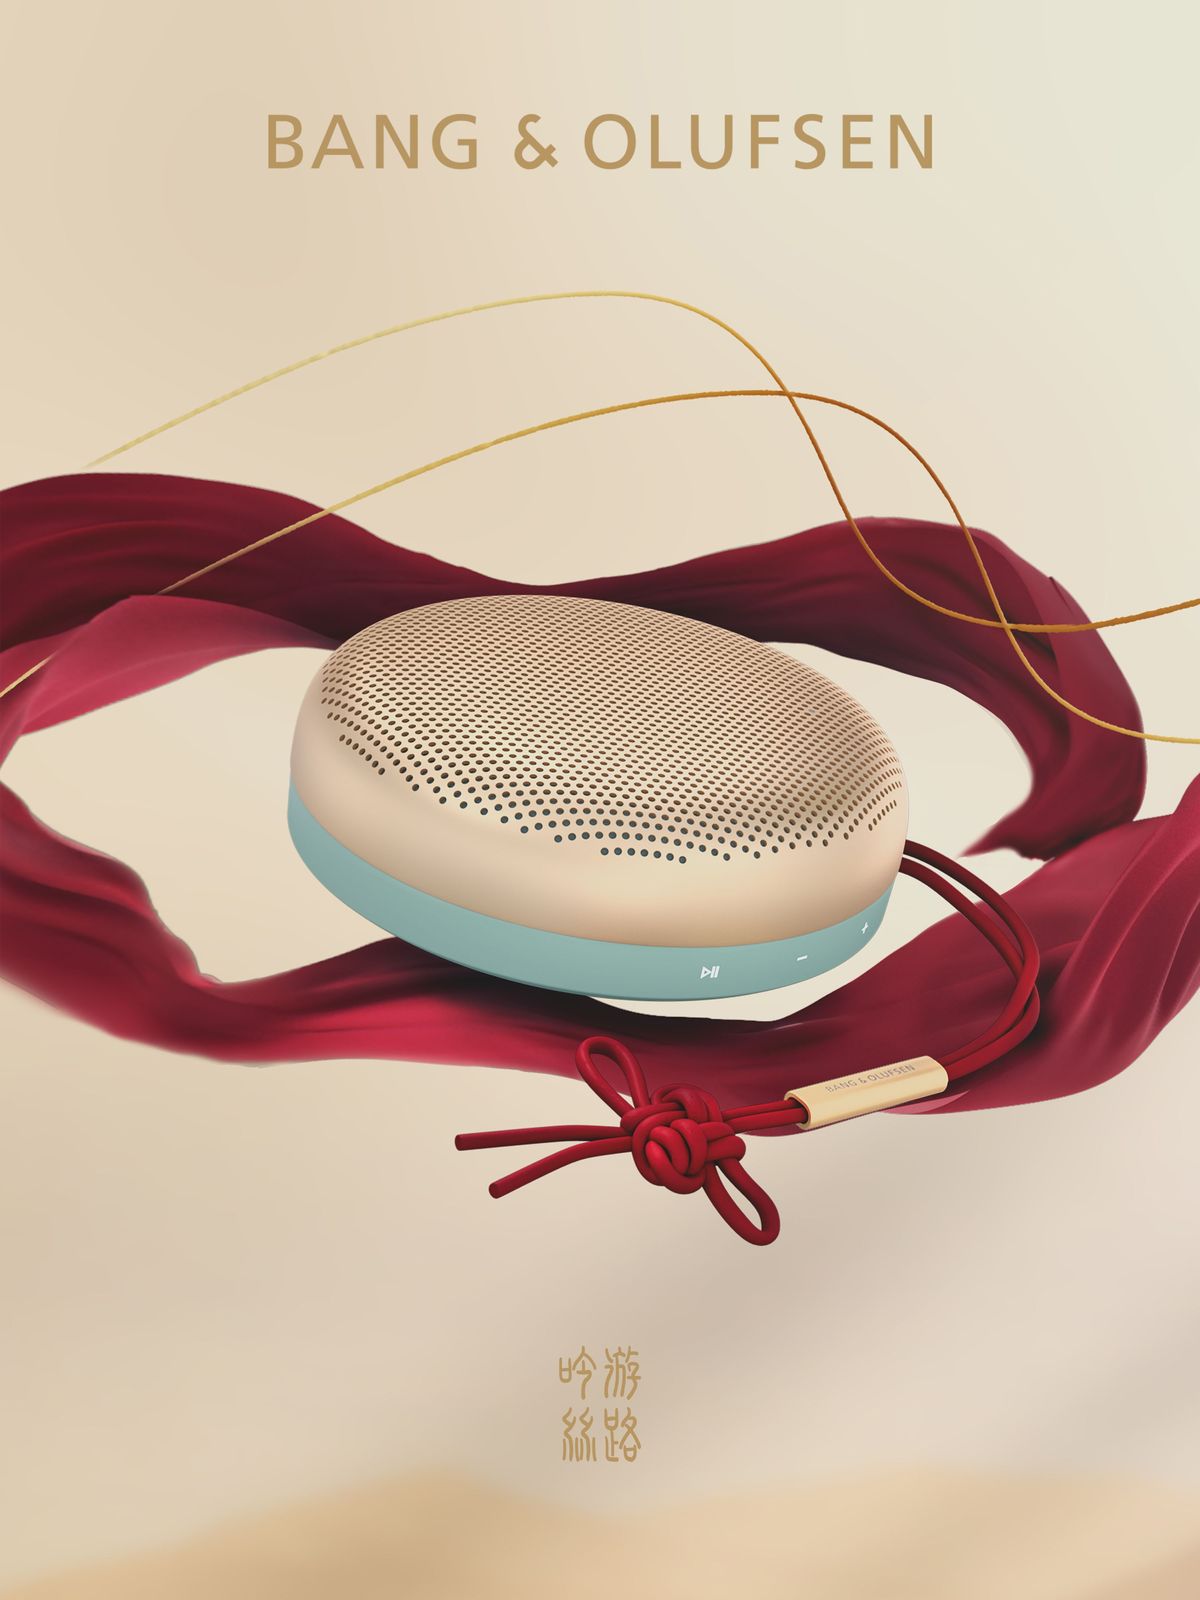 Bang & Olufsen launches limited-edition collection celebrating the Lunar New Year 2023